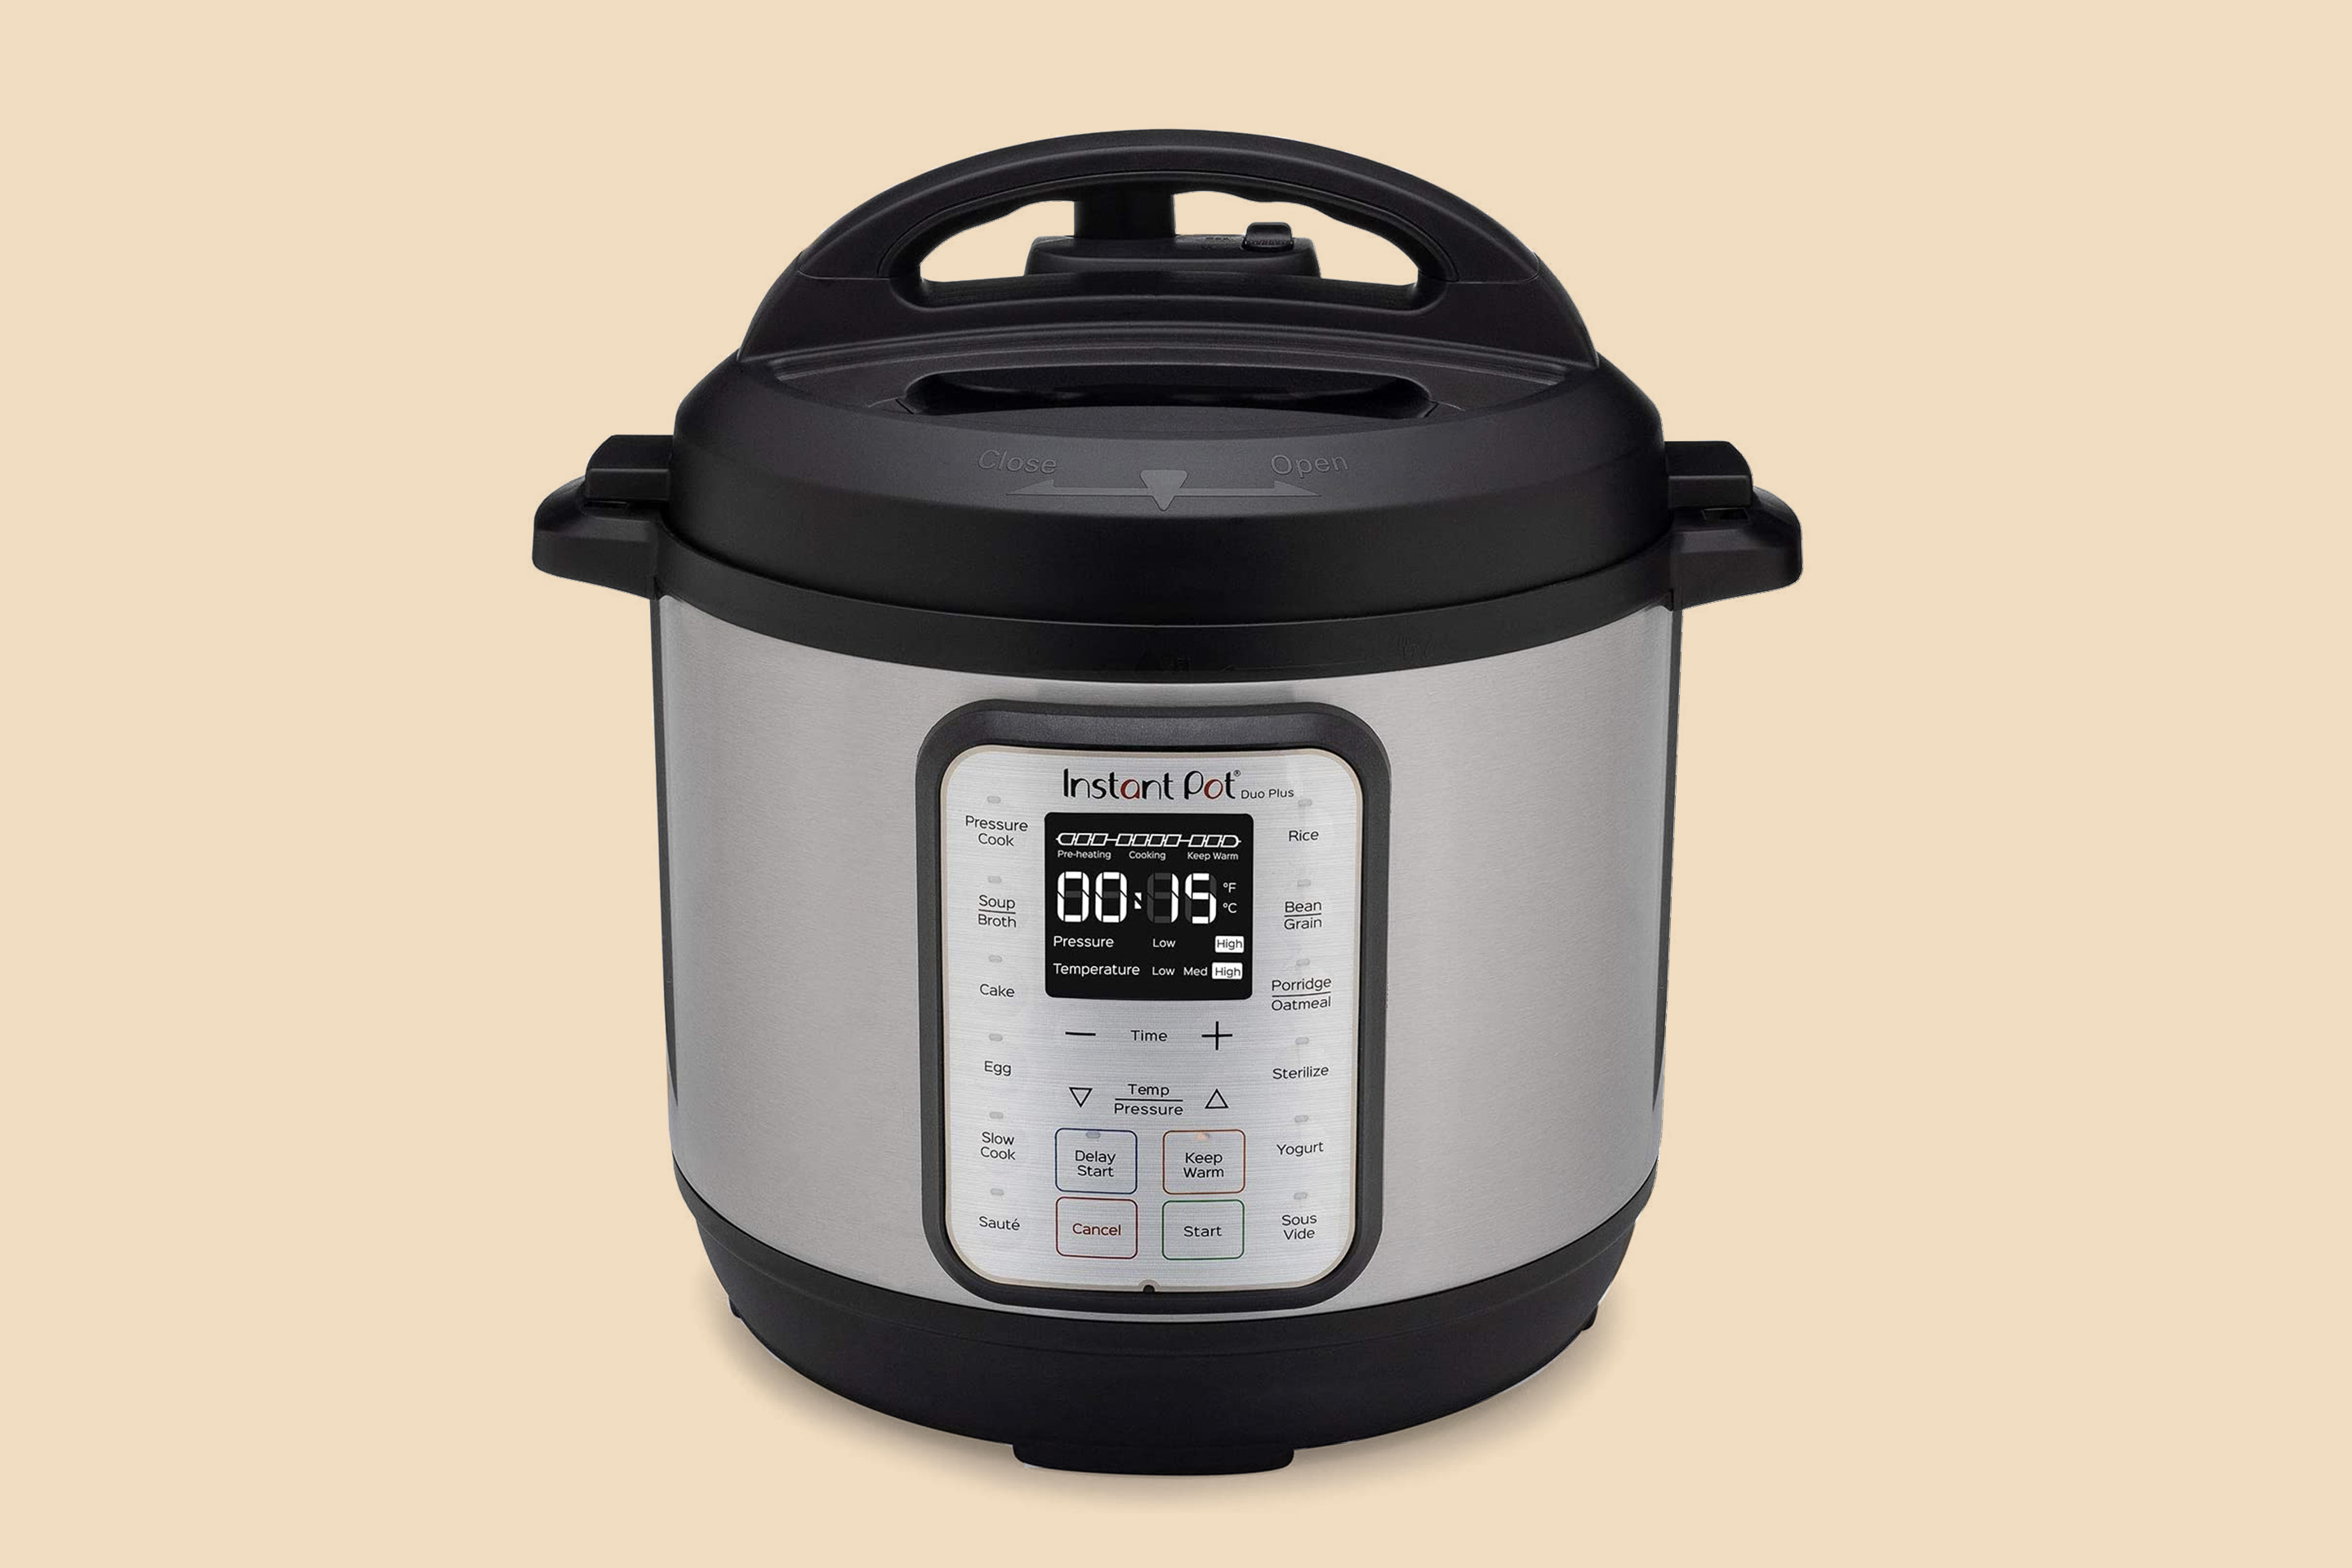 The Best Instant Pot Deals for Amazon Prime Day 2021